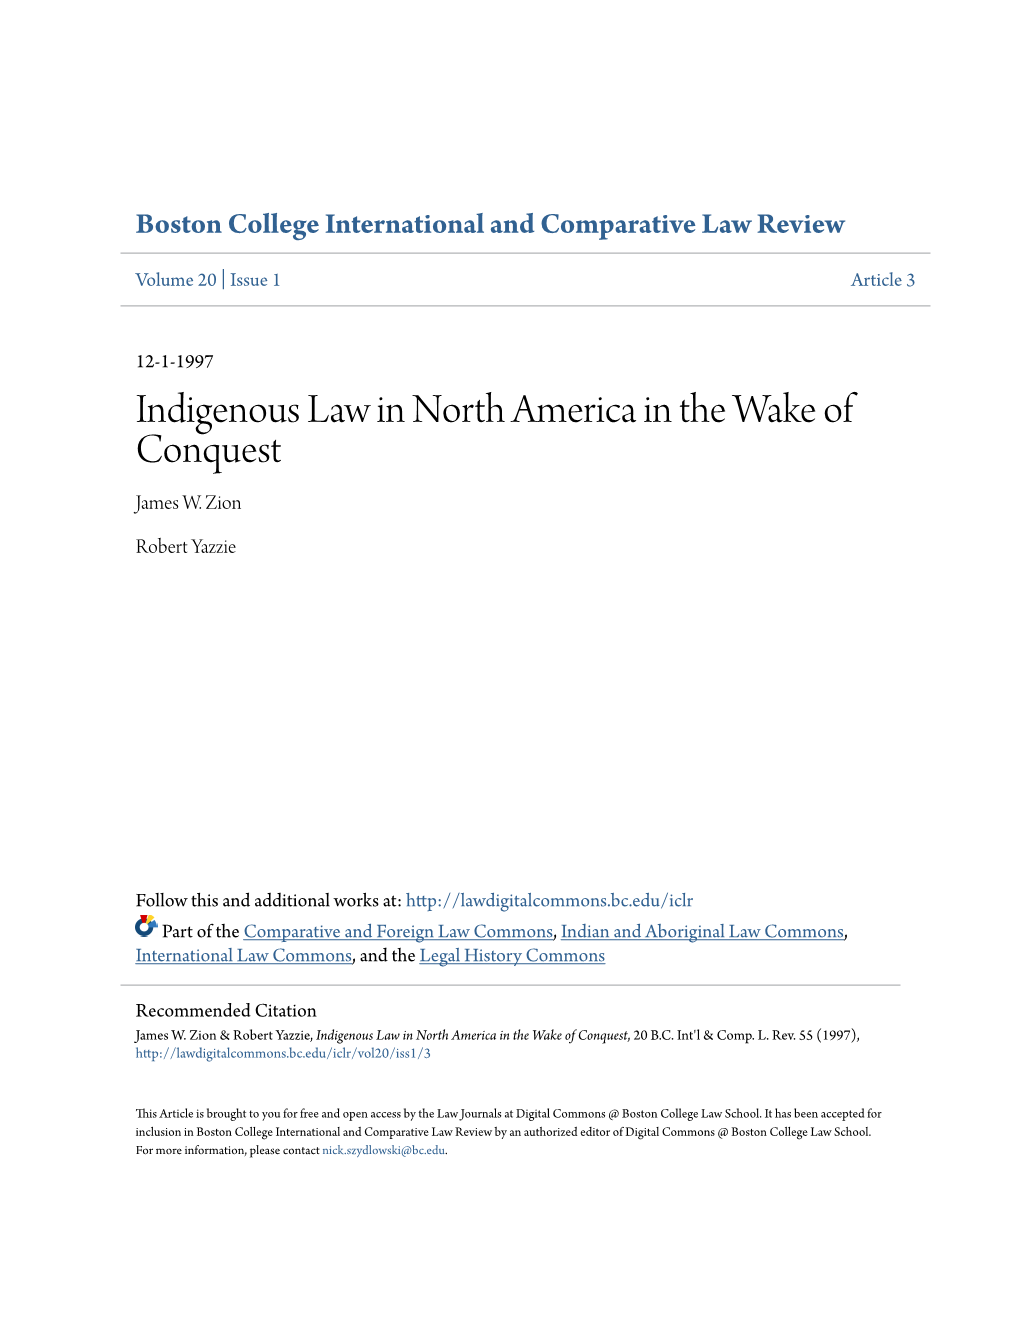 Indigenous Law in North America in the Wake of Conquest James W